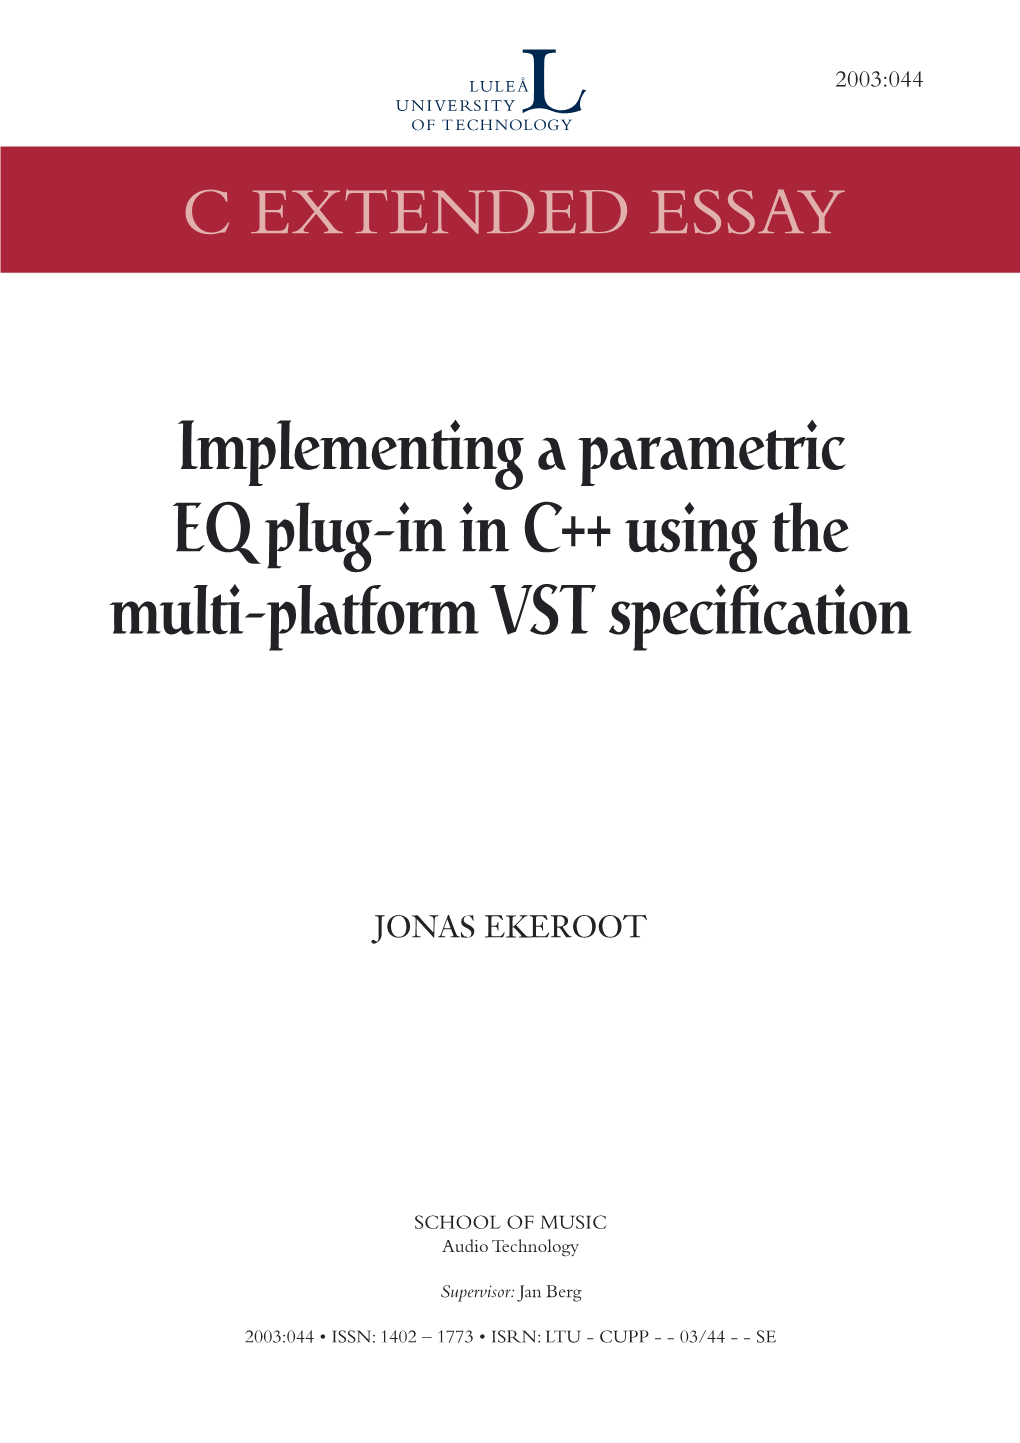 Implementing a Parametric EQ Plug-In in C++ Using the Multi-Platform VST Specification